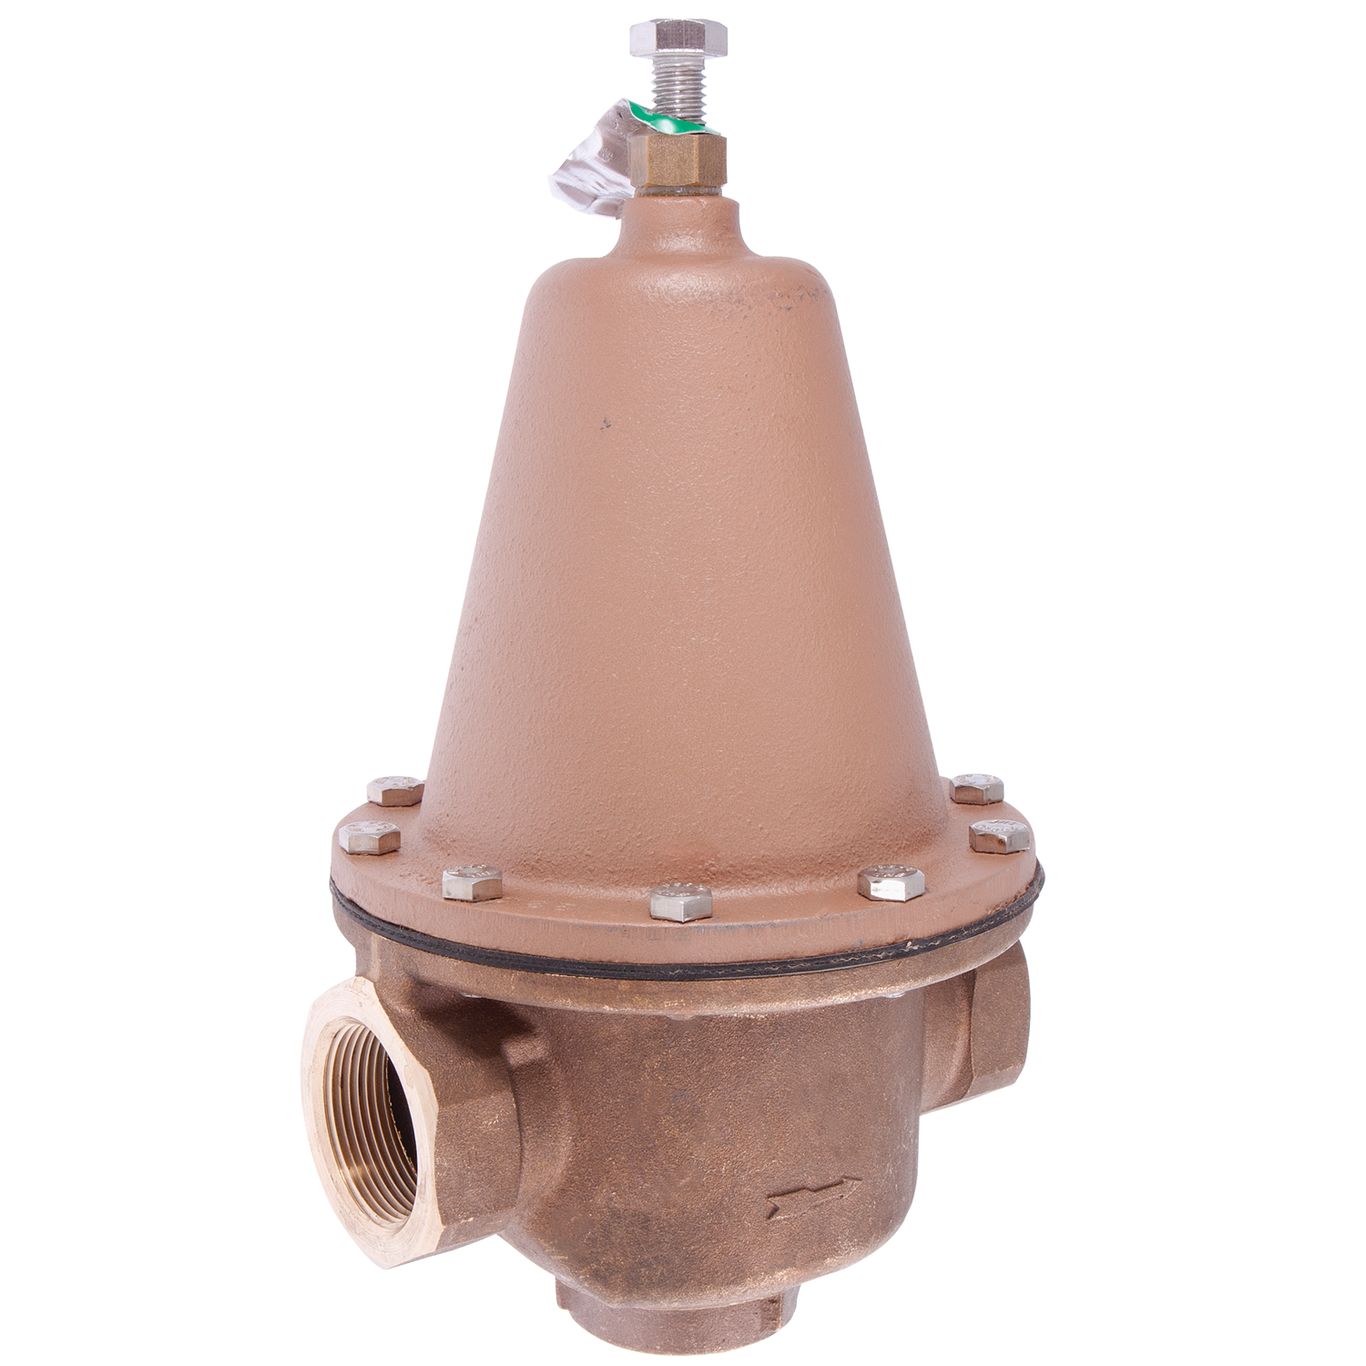 0298585 - 2 In Lead Free Iron High Capacity Water Pressure Reducing Valve, FNPT Inlet and Outl